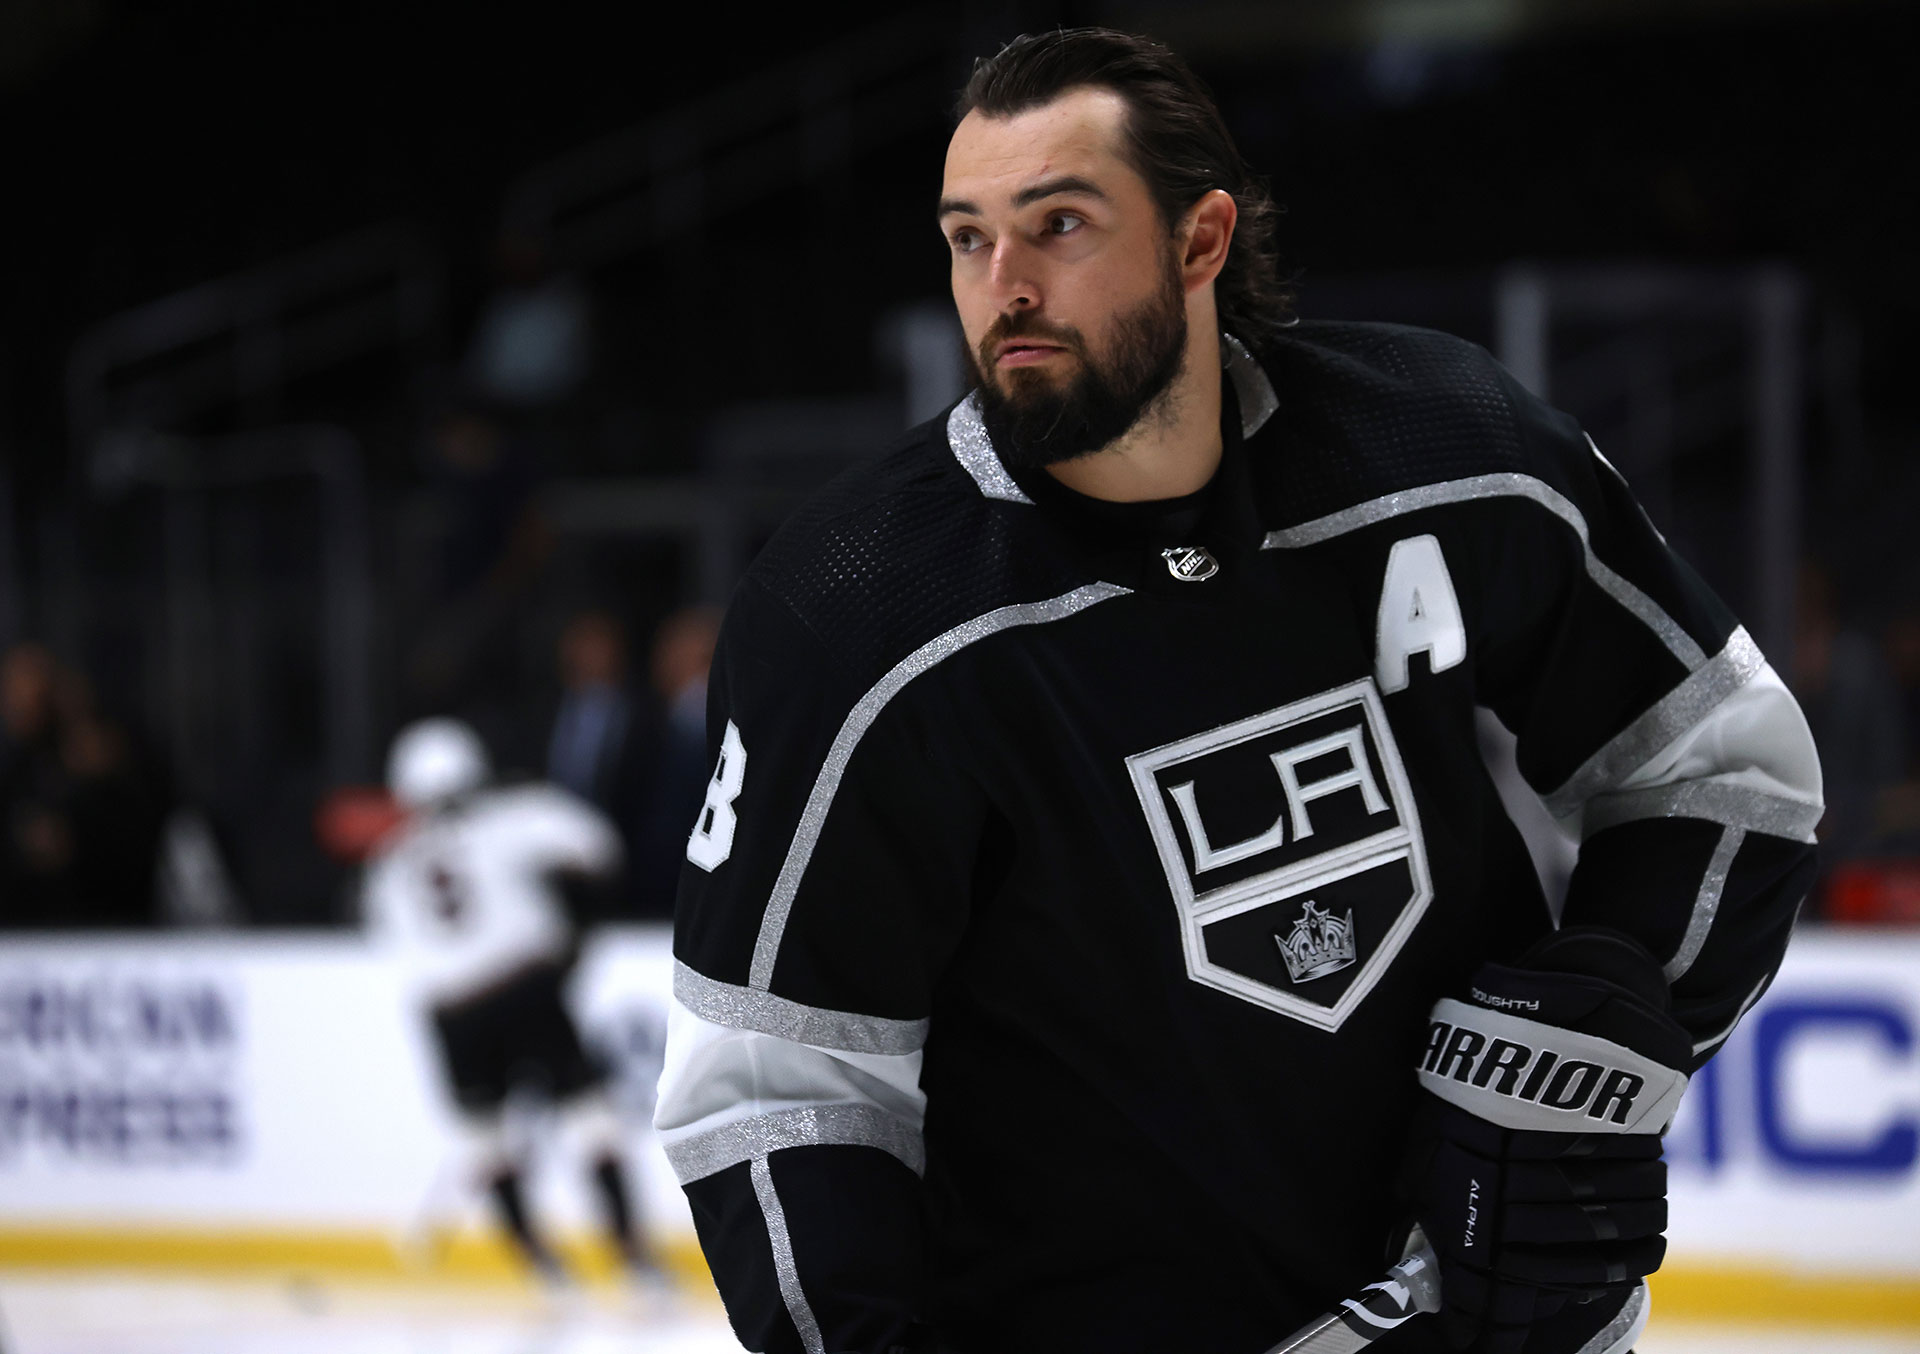 Drew Doughty #8 of the Los Angeles Kings during warm up before a preseason game